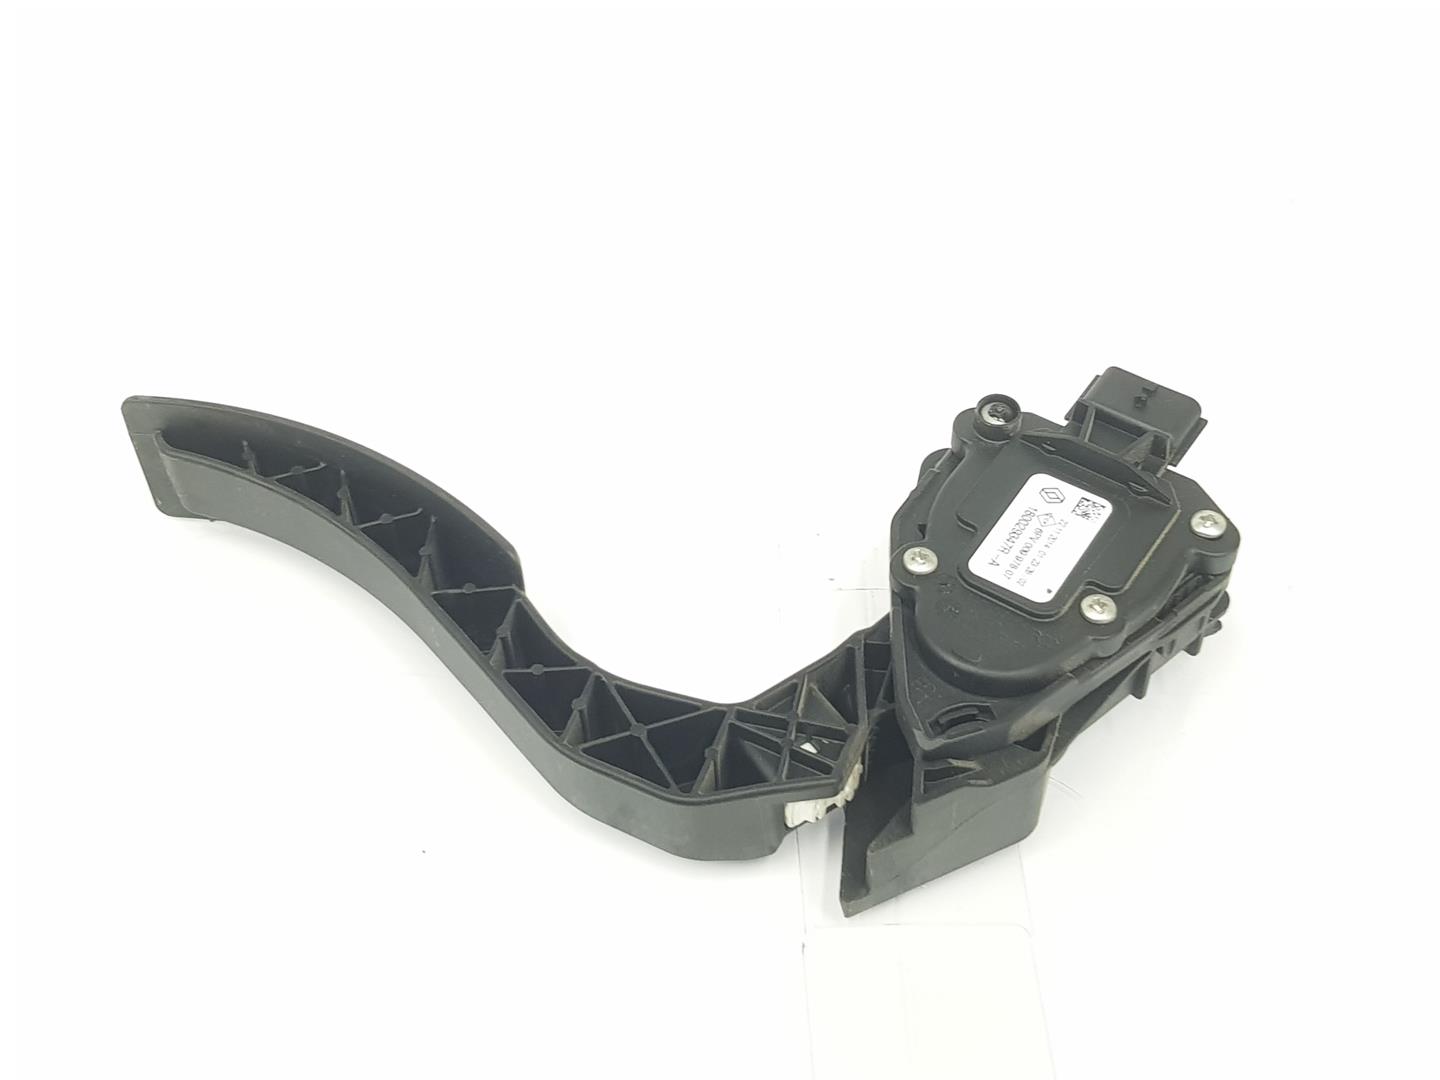 RENAULT Clio 3 generation (2005-2012) Other Body Parts 180029347R, 6PV009978, 180029347R 19871959